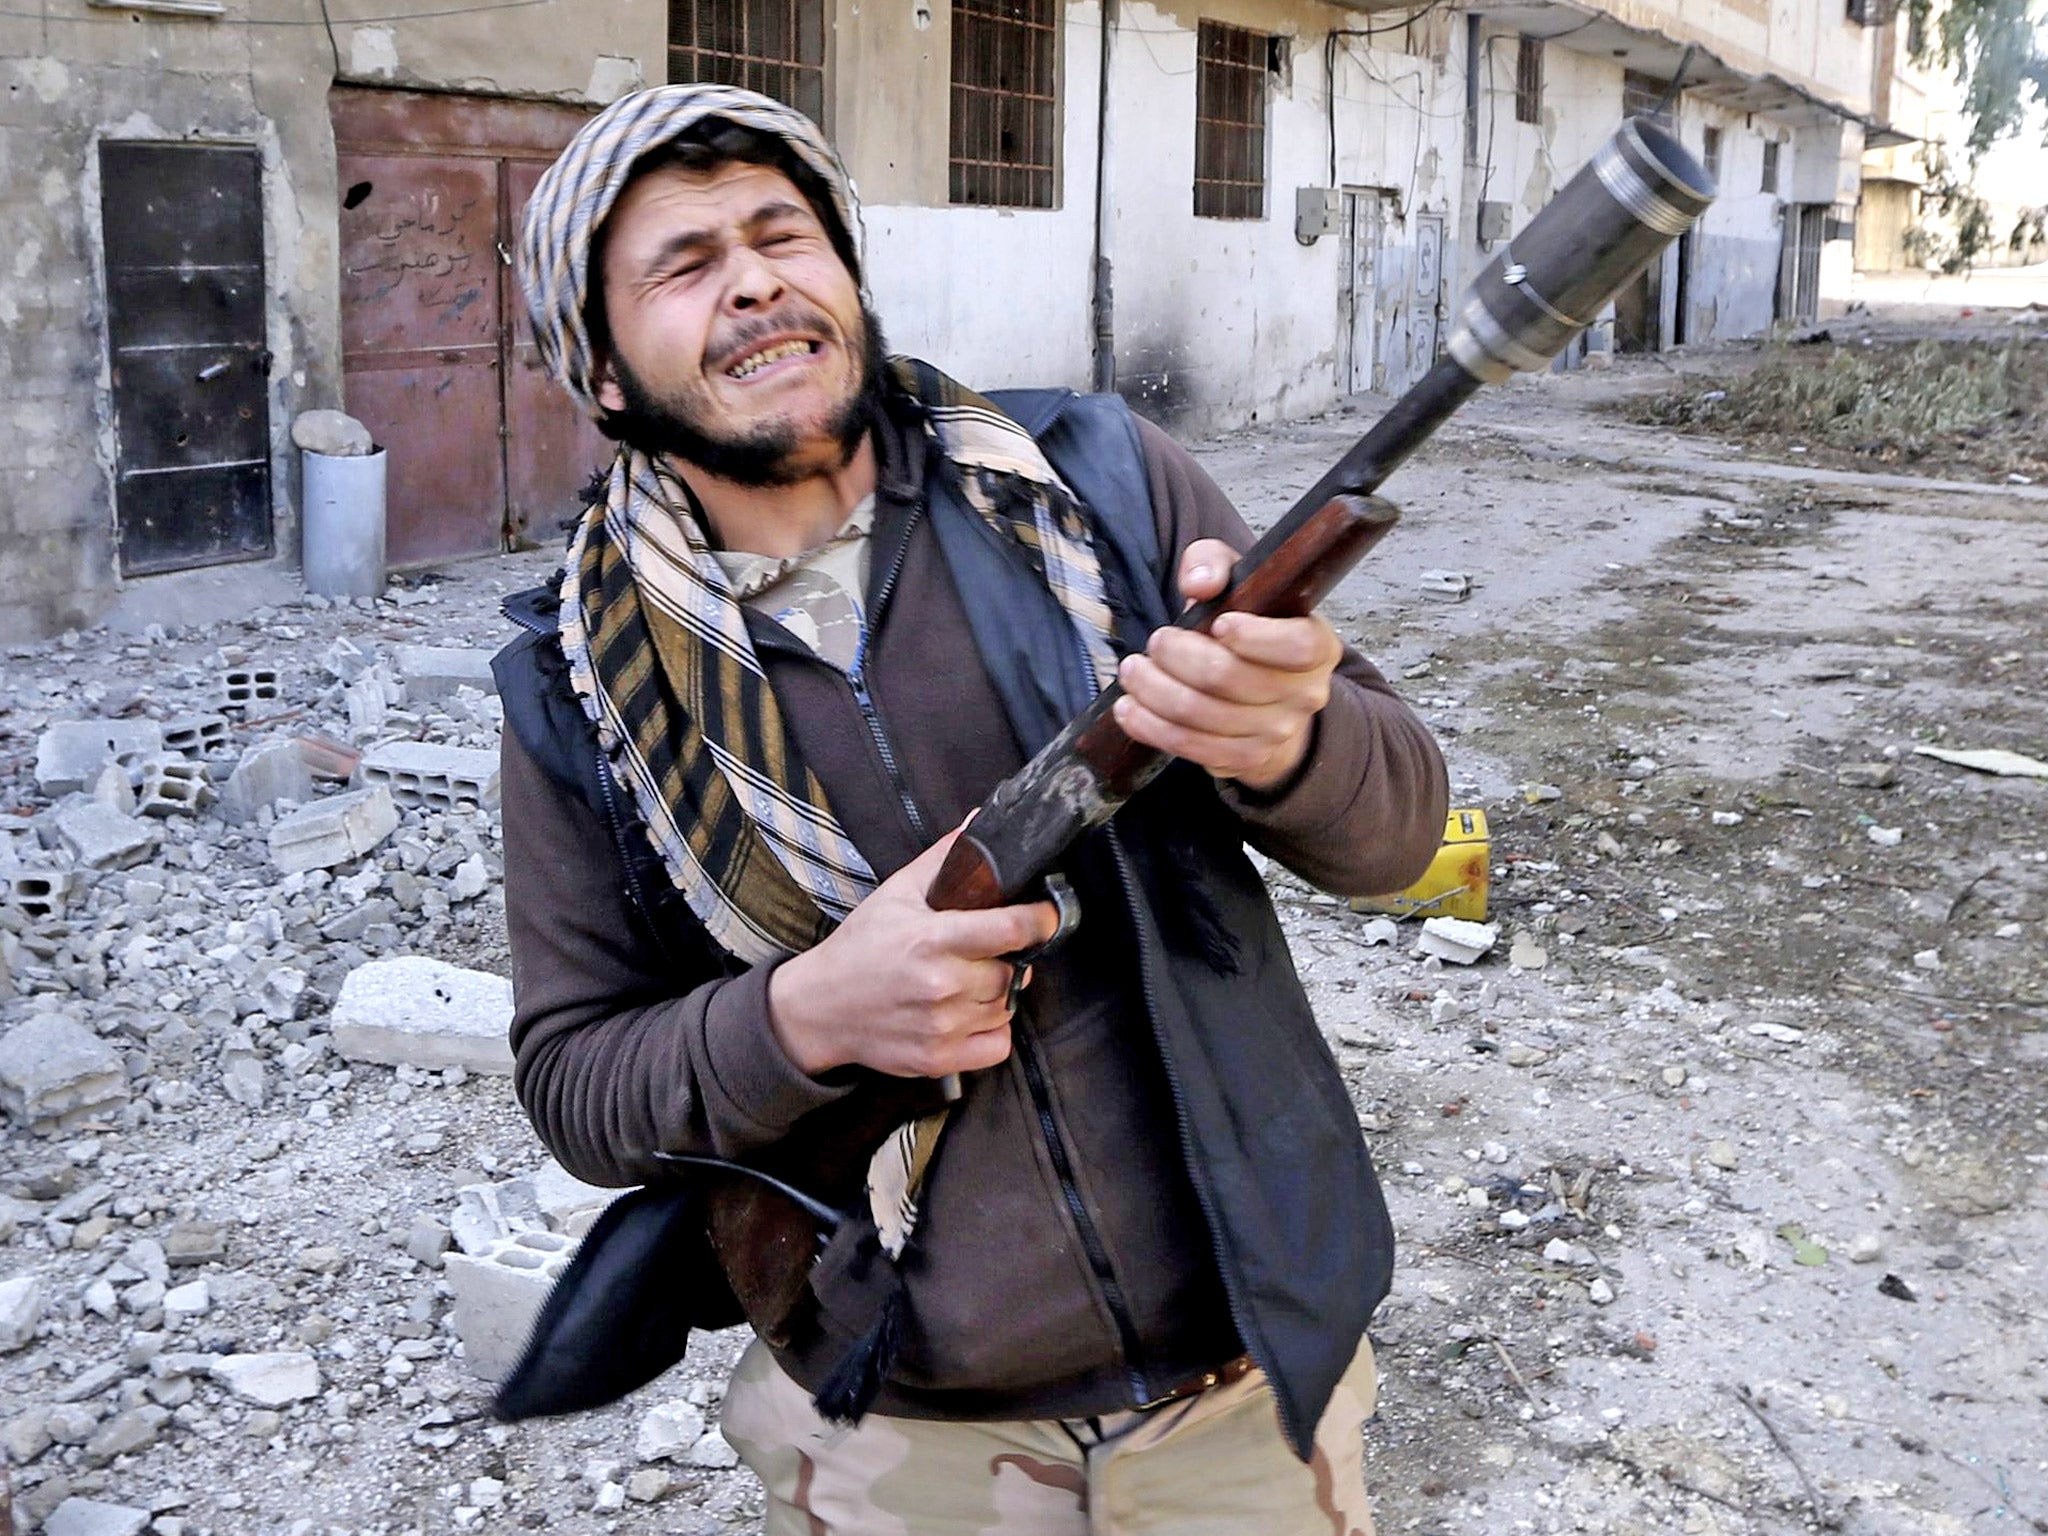 A Free Syrian Army rebel in a Damascus suburb